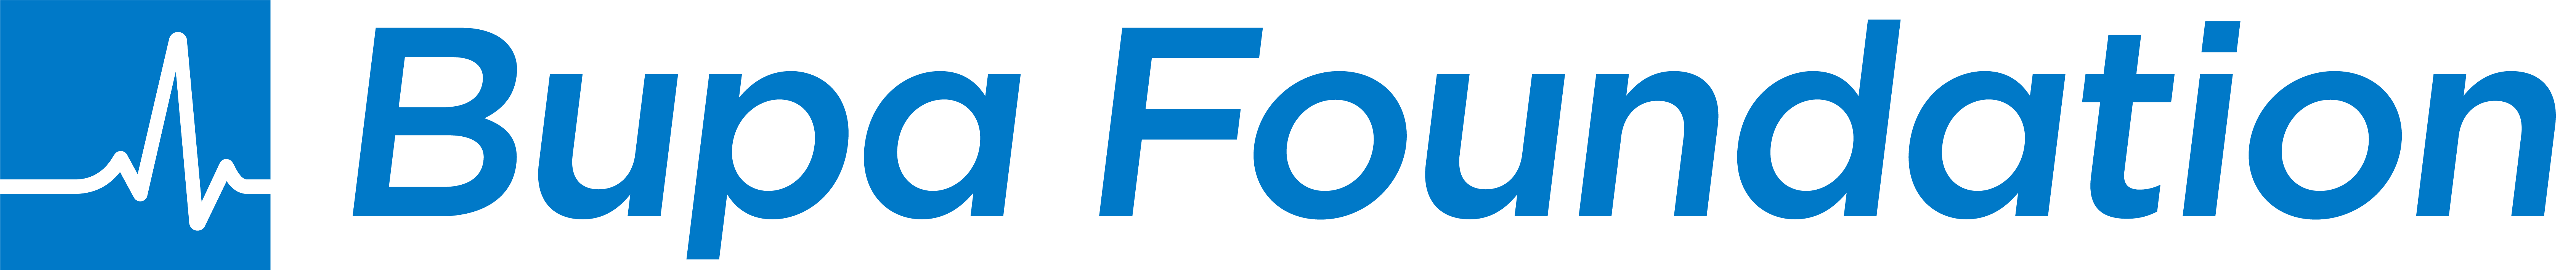 Bupa Foundation logo in blue text